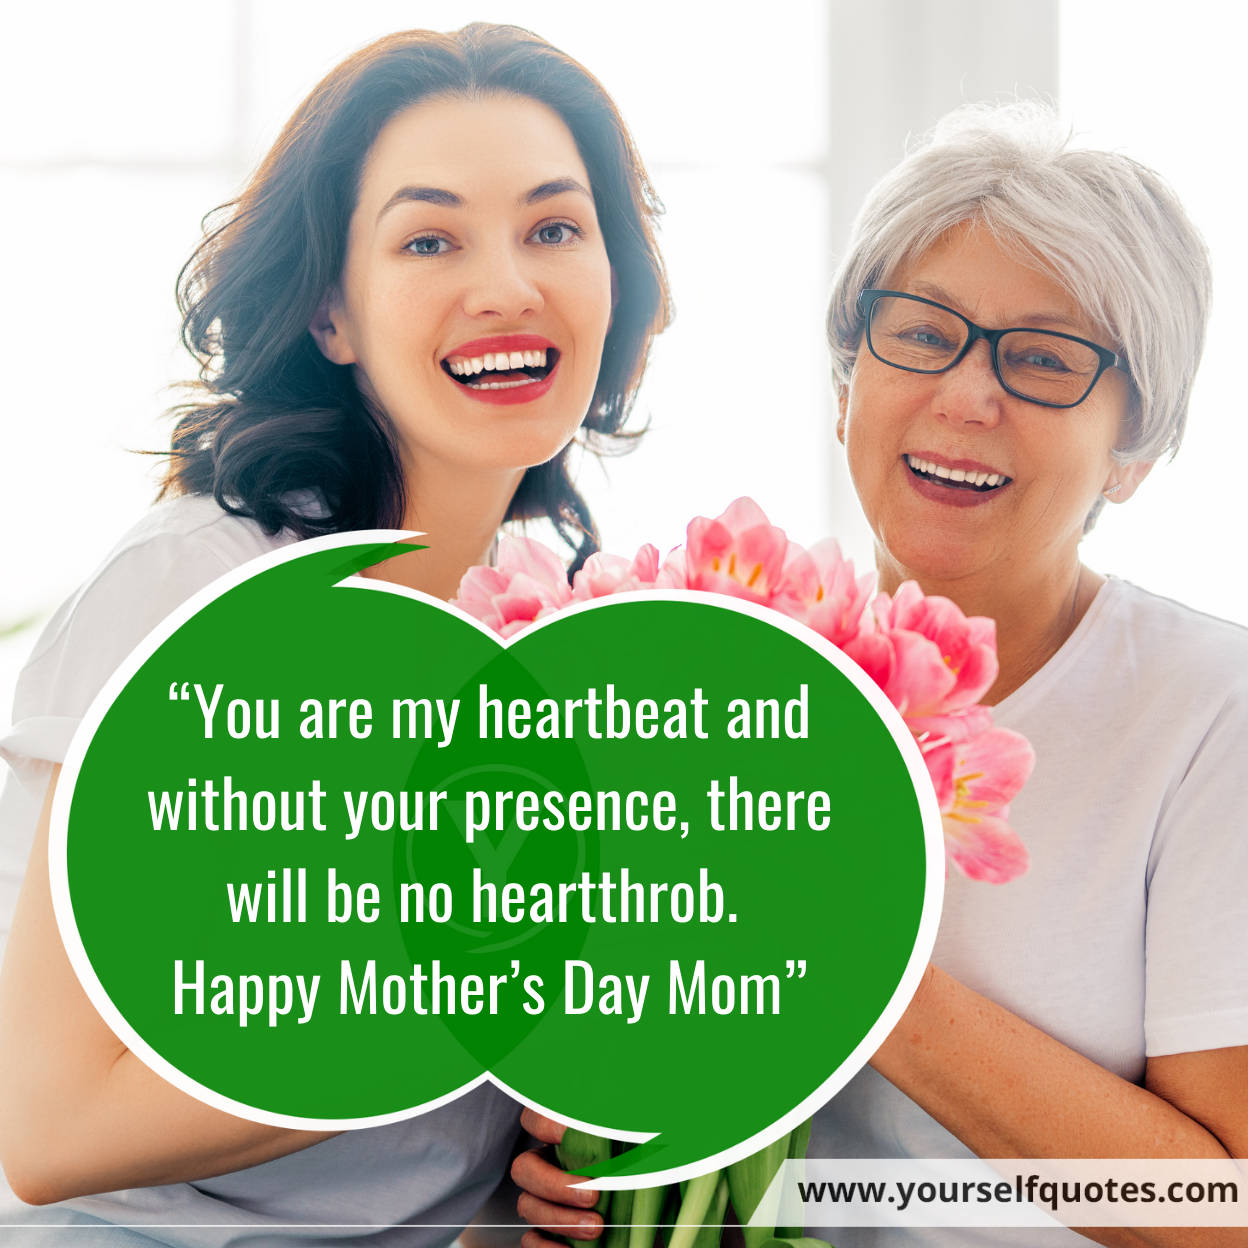 Happy Mothers Day Wishes Pictures